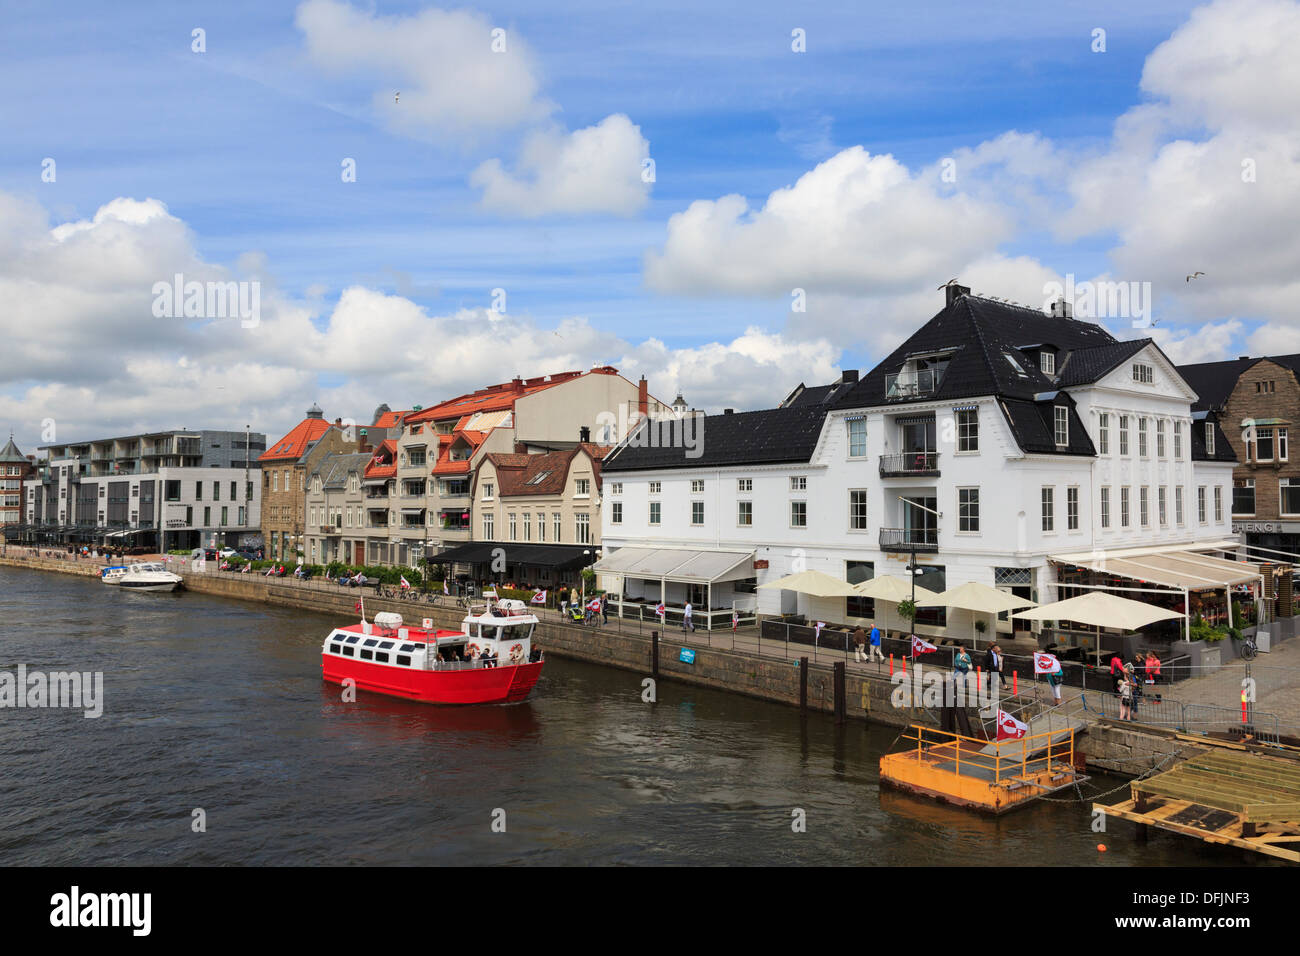 City ferry by jetty on quay on River Glomma in new town district of Fredrikstad, Ostfold, Norway, Scandinavia Stock Photo